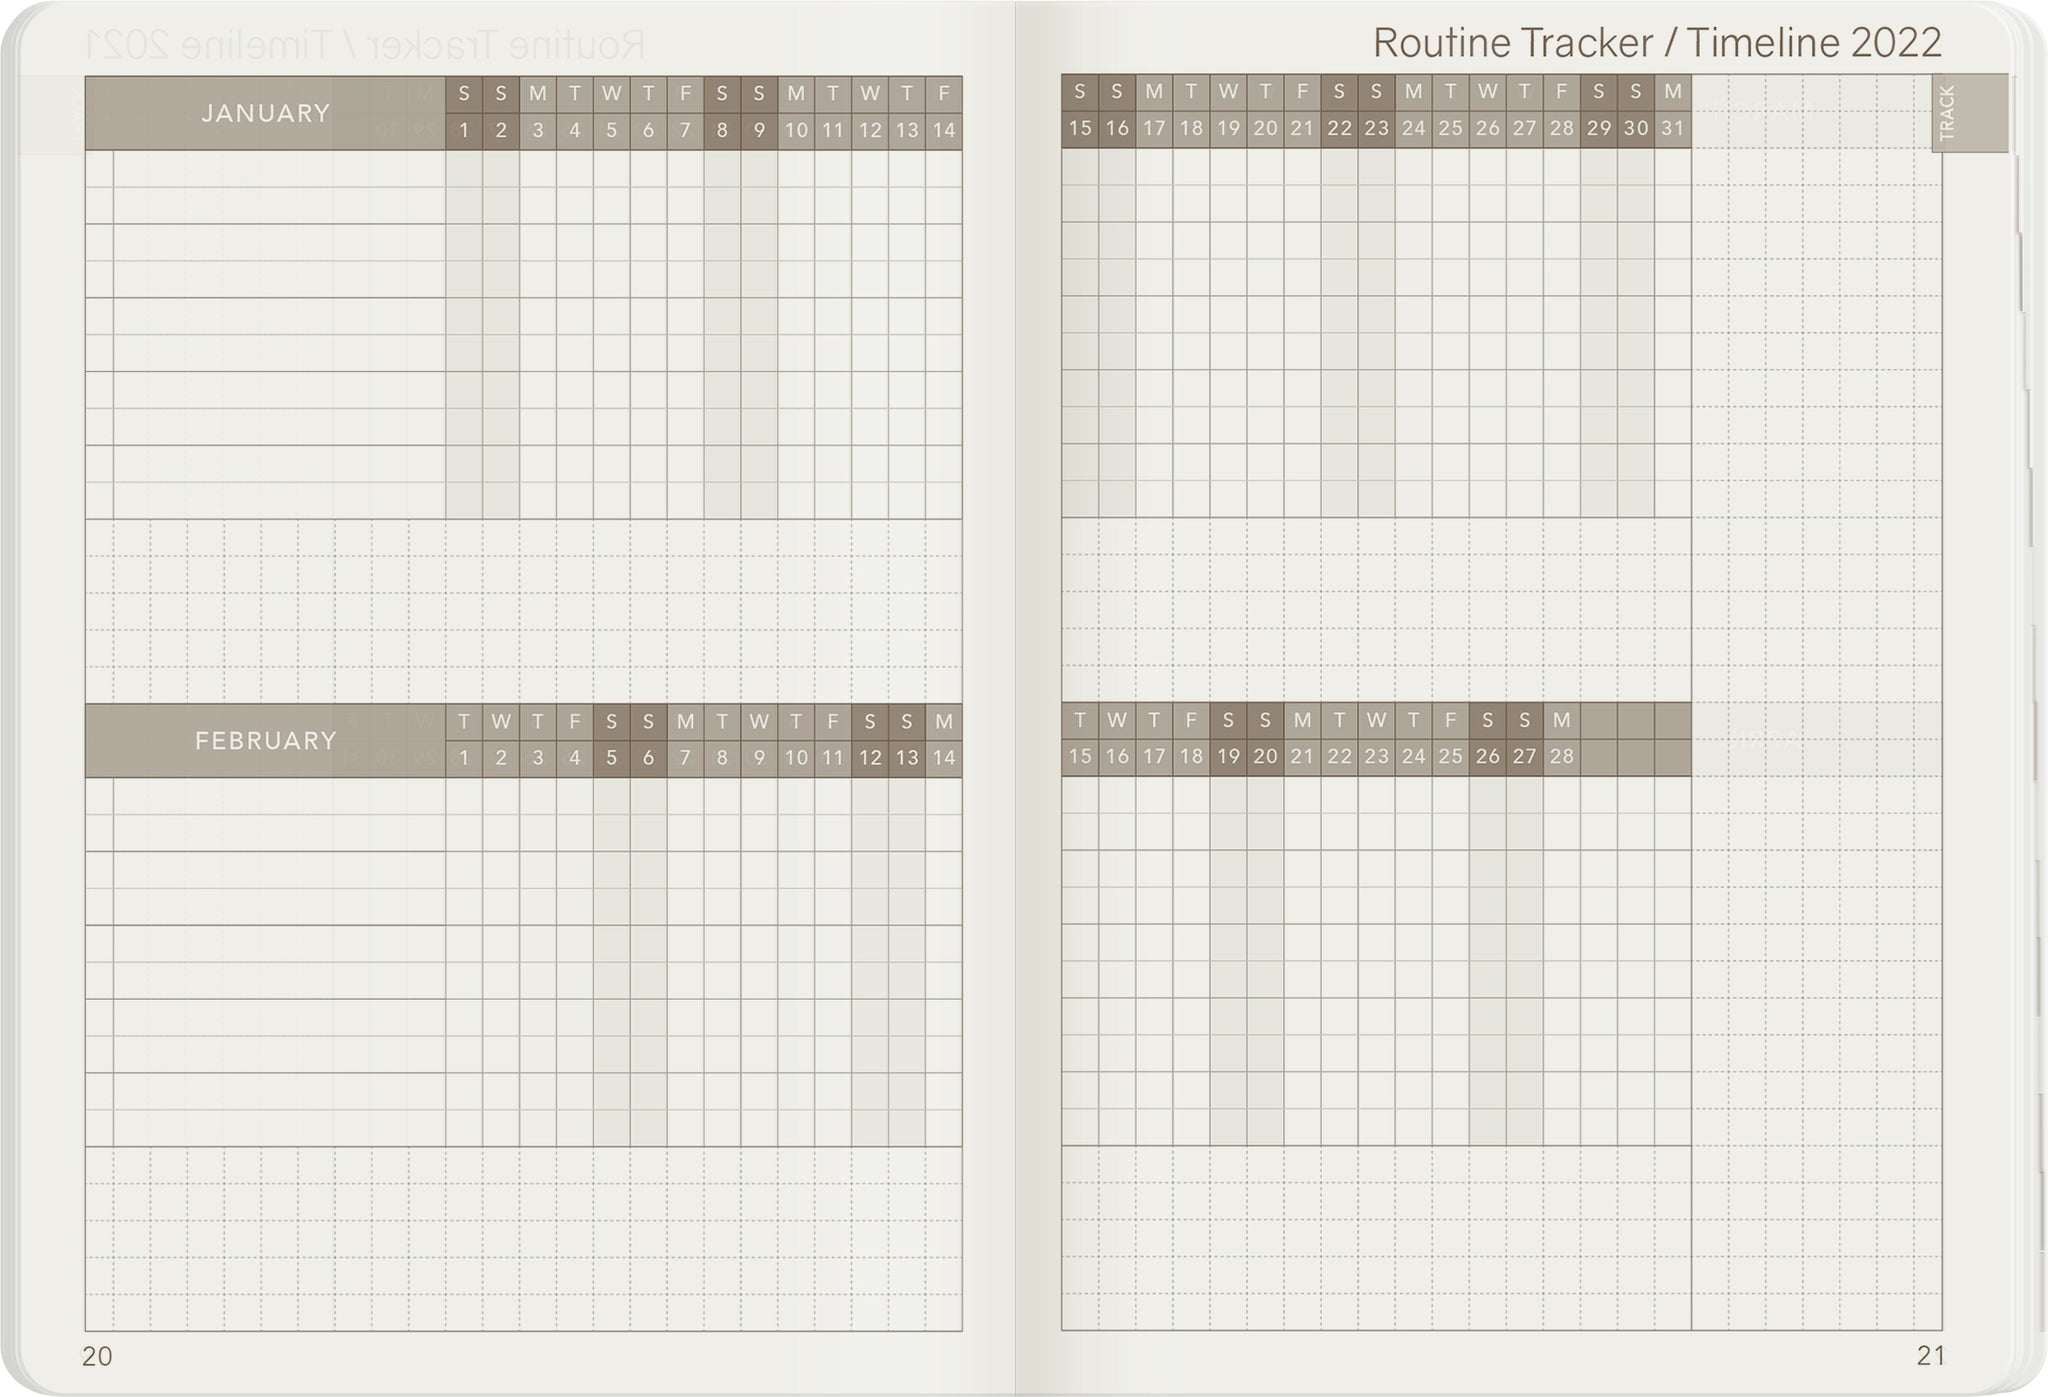 Sale | 2022 A6 Weekly Planner - 52gsm Tomoe River Paper